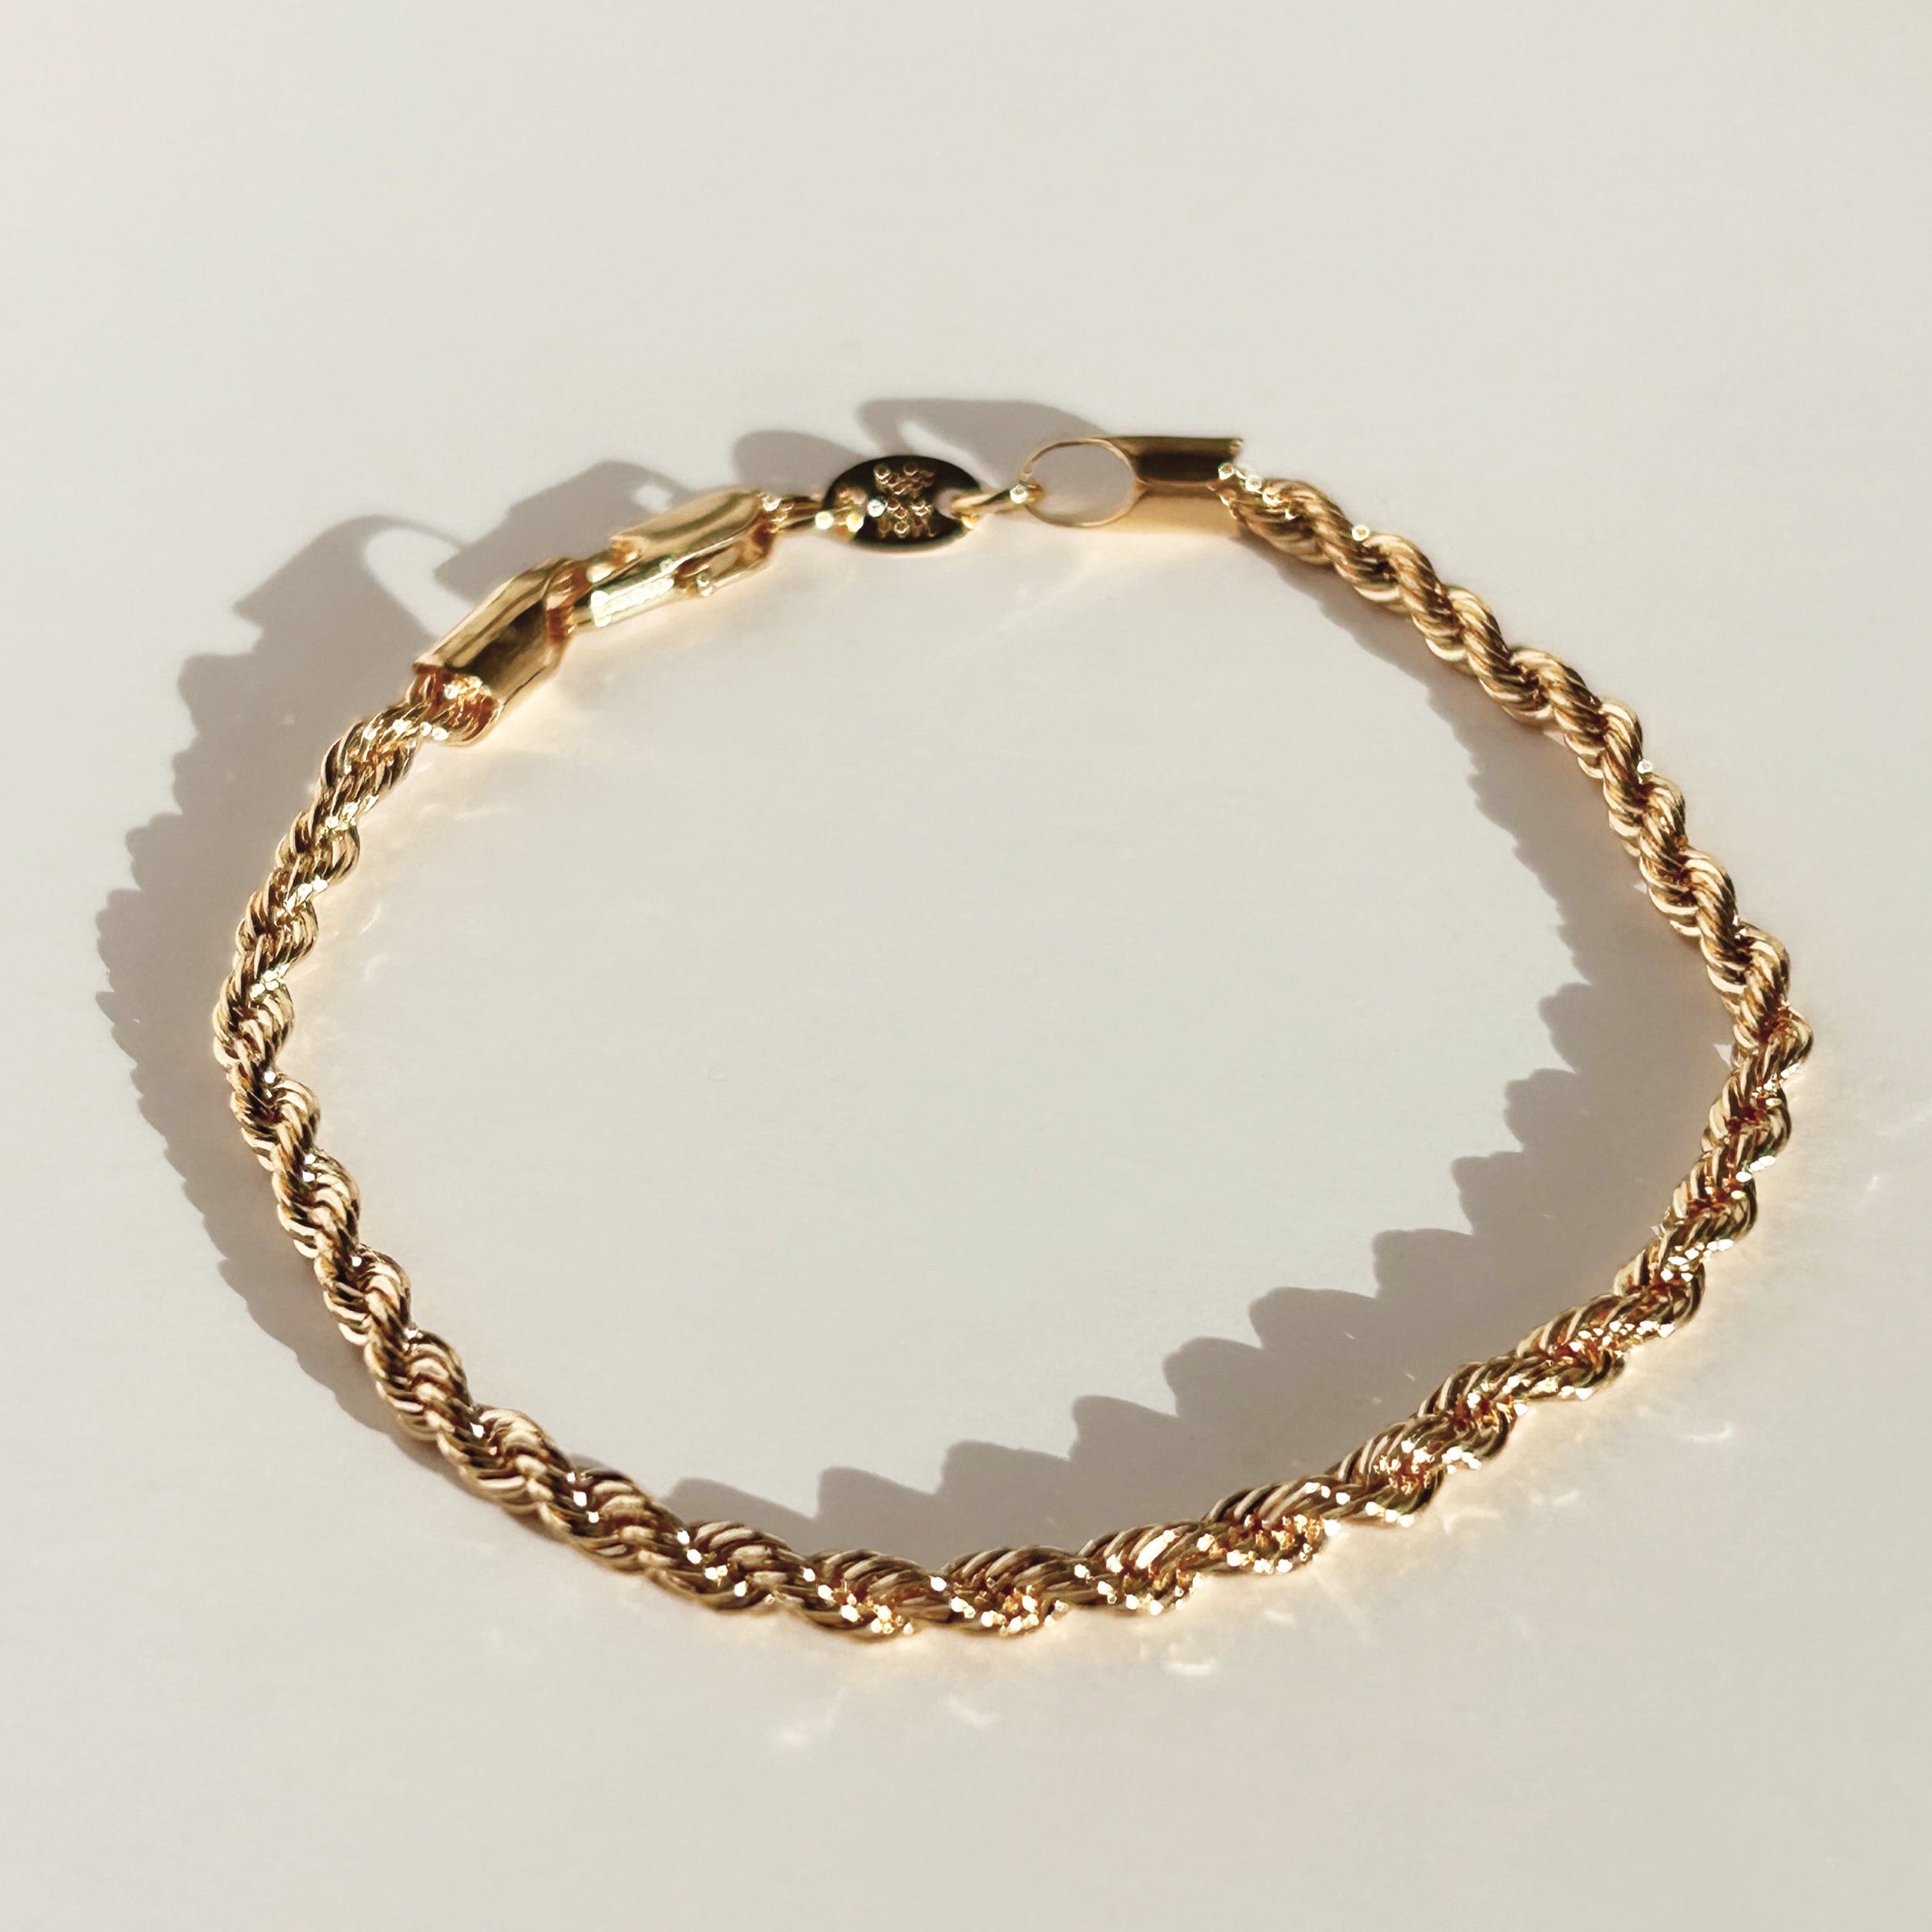 Adrian Rope Chain Bracelet | Truly Blessed Jewels 6.5